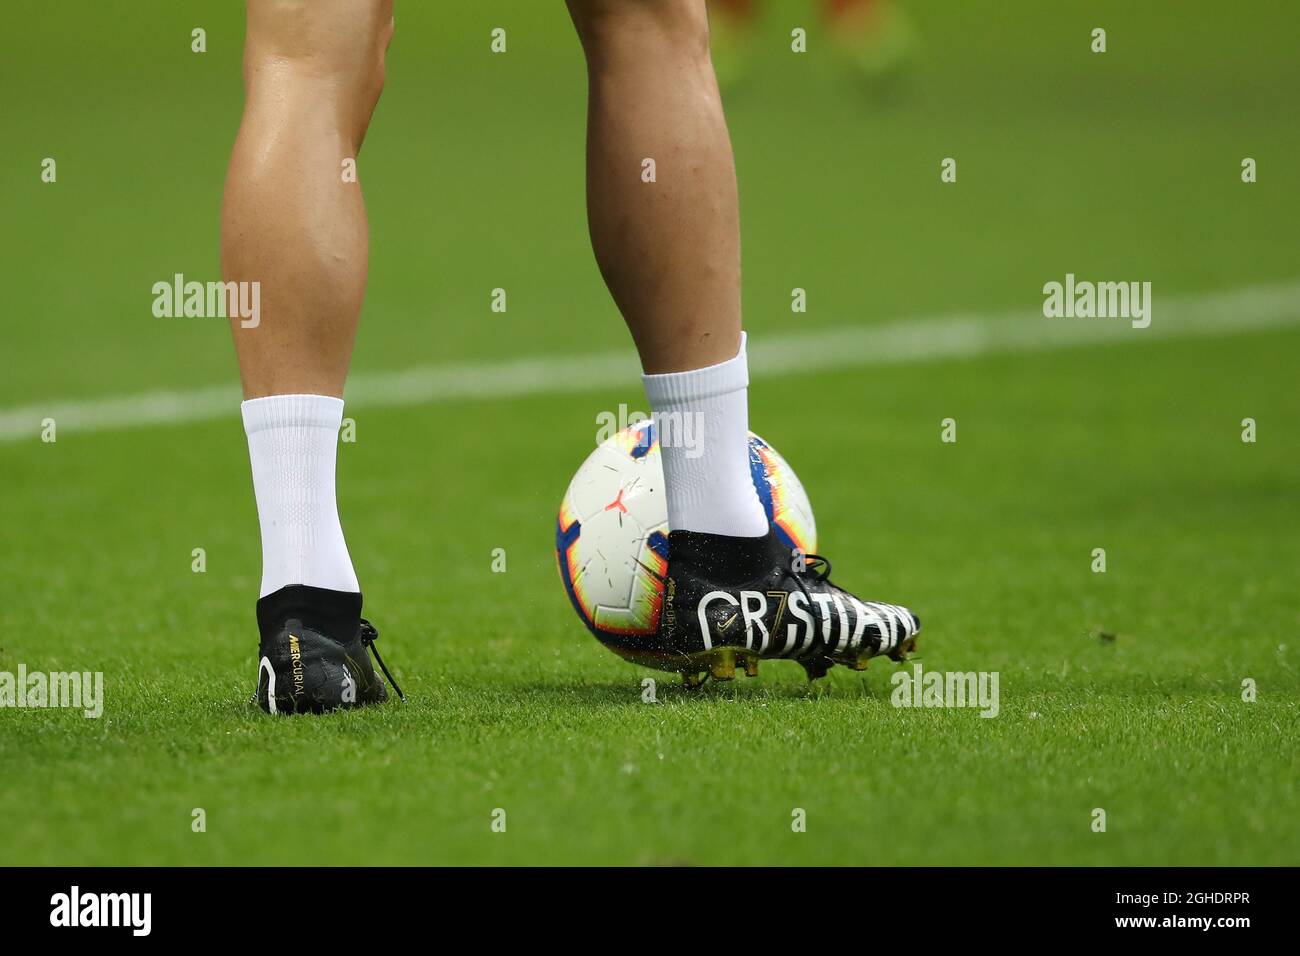 Cristiano Ronaldo of Juventus' new nike boots during the Serie A match at  Giuseppe Meazza, Milan.